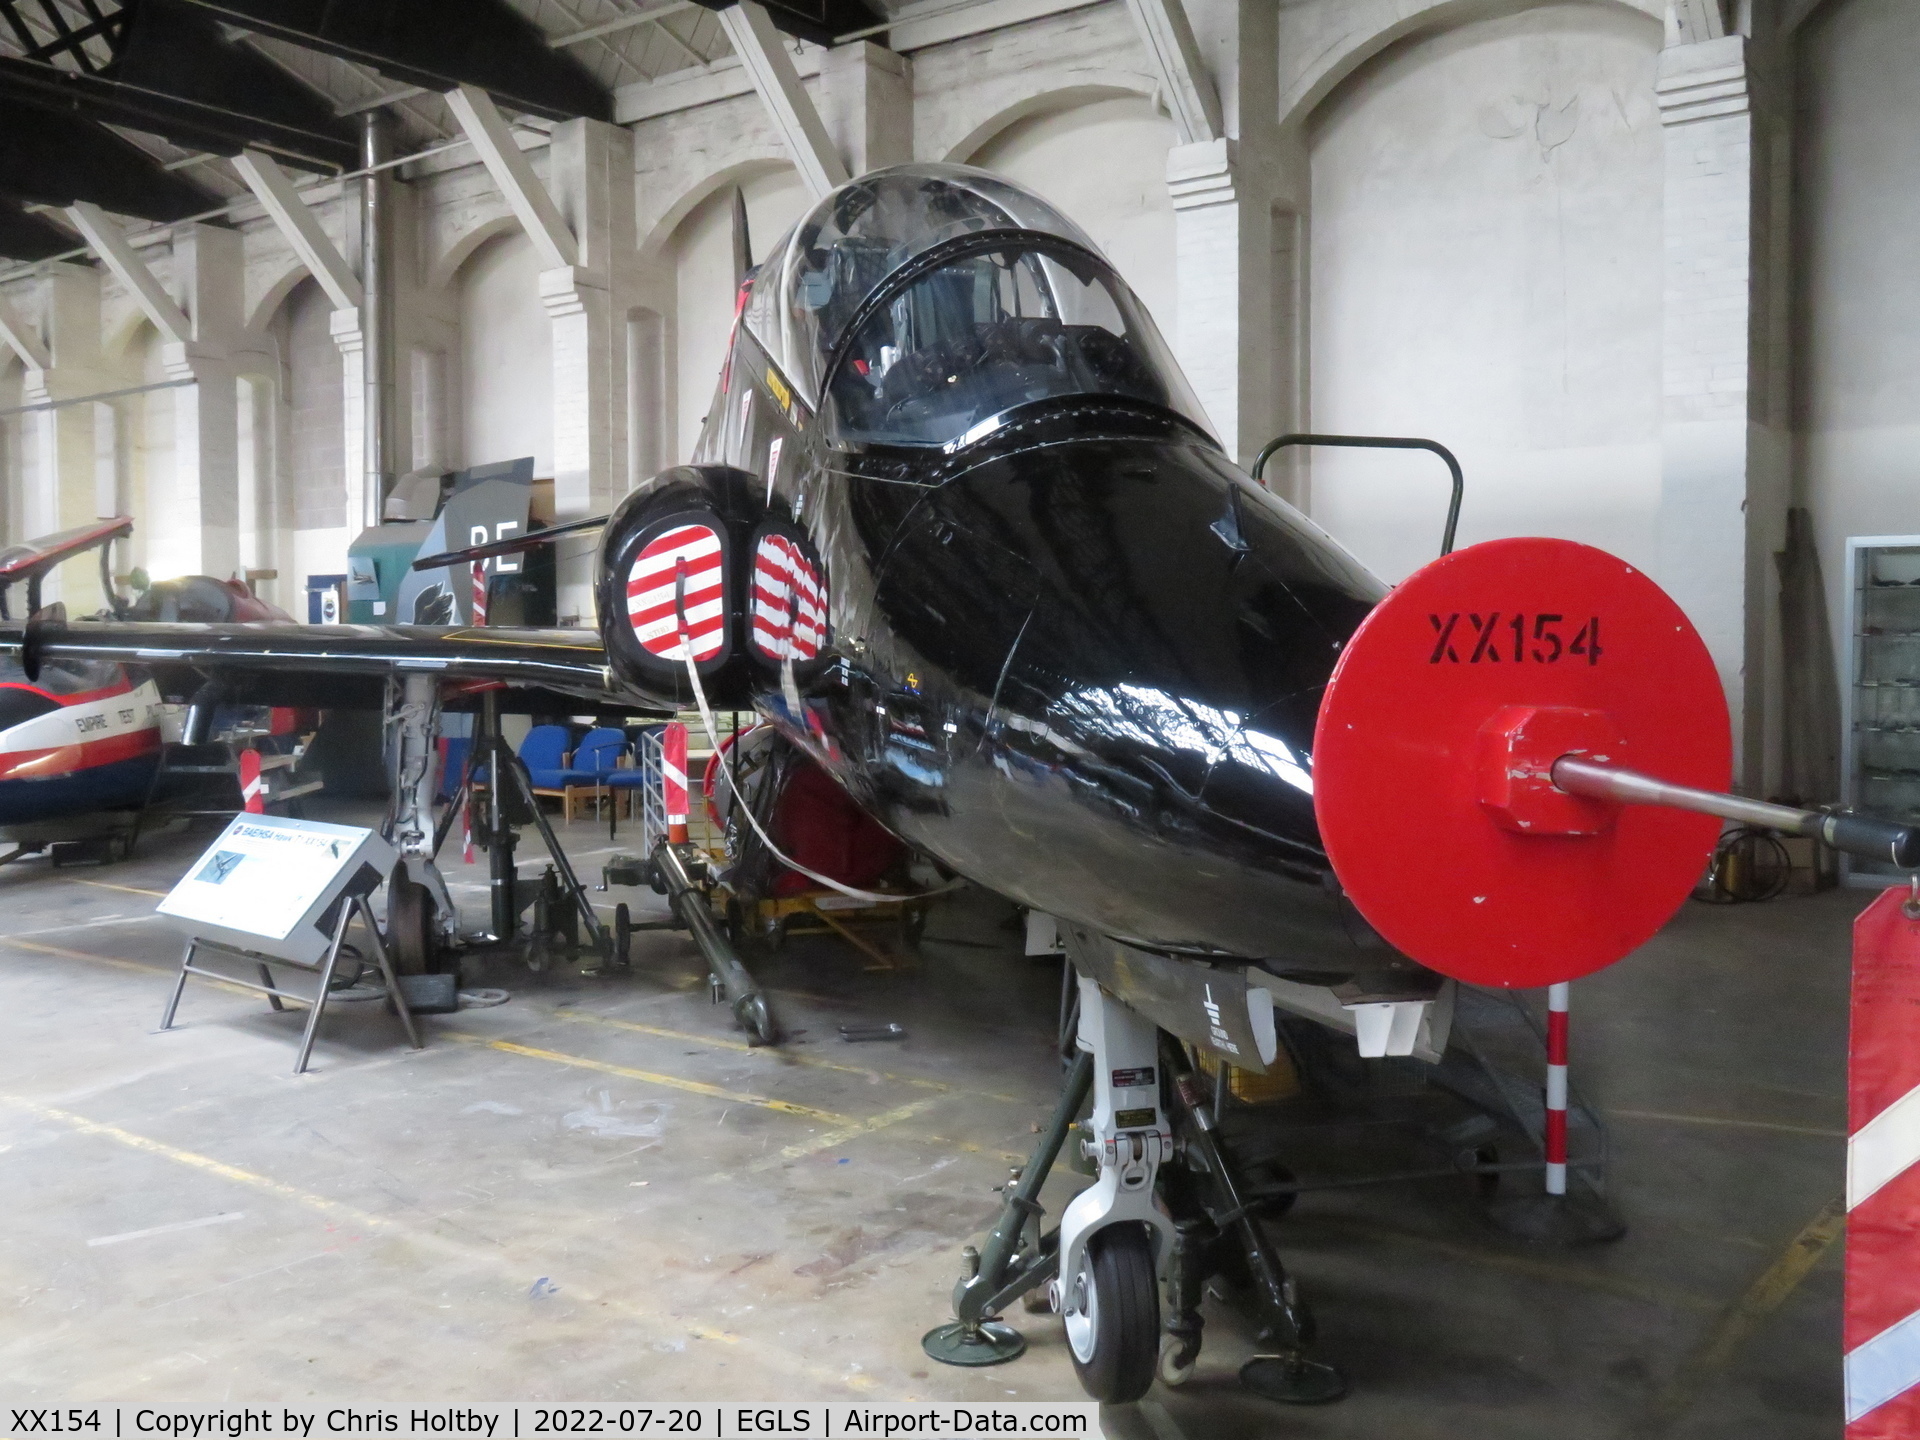 XX154, 1974 Hawker Siddeley Hawk T.1 C/N 001/312001, Hawk T.1 preserved at Old Sarum as part of the Boscombe Down Aircraft Collection